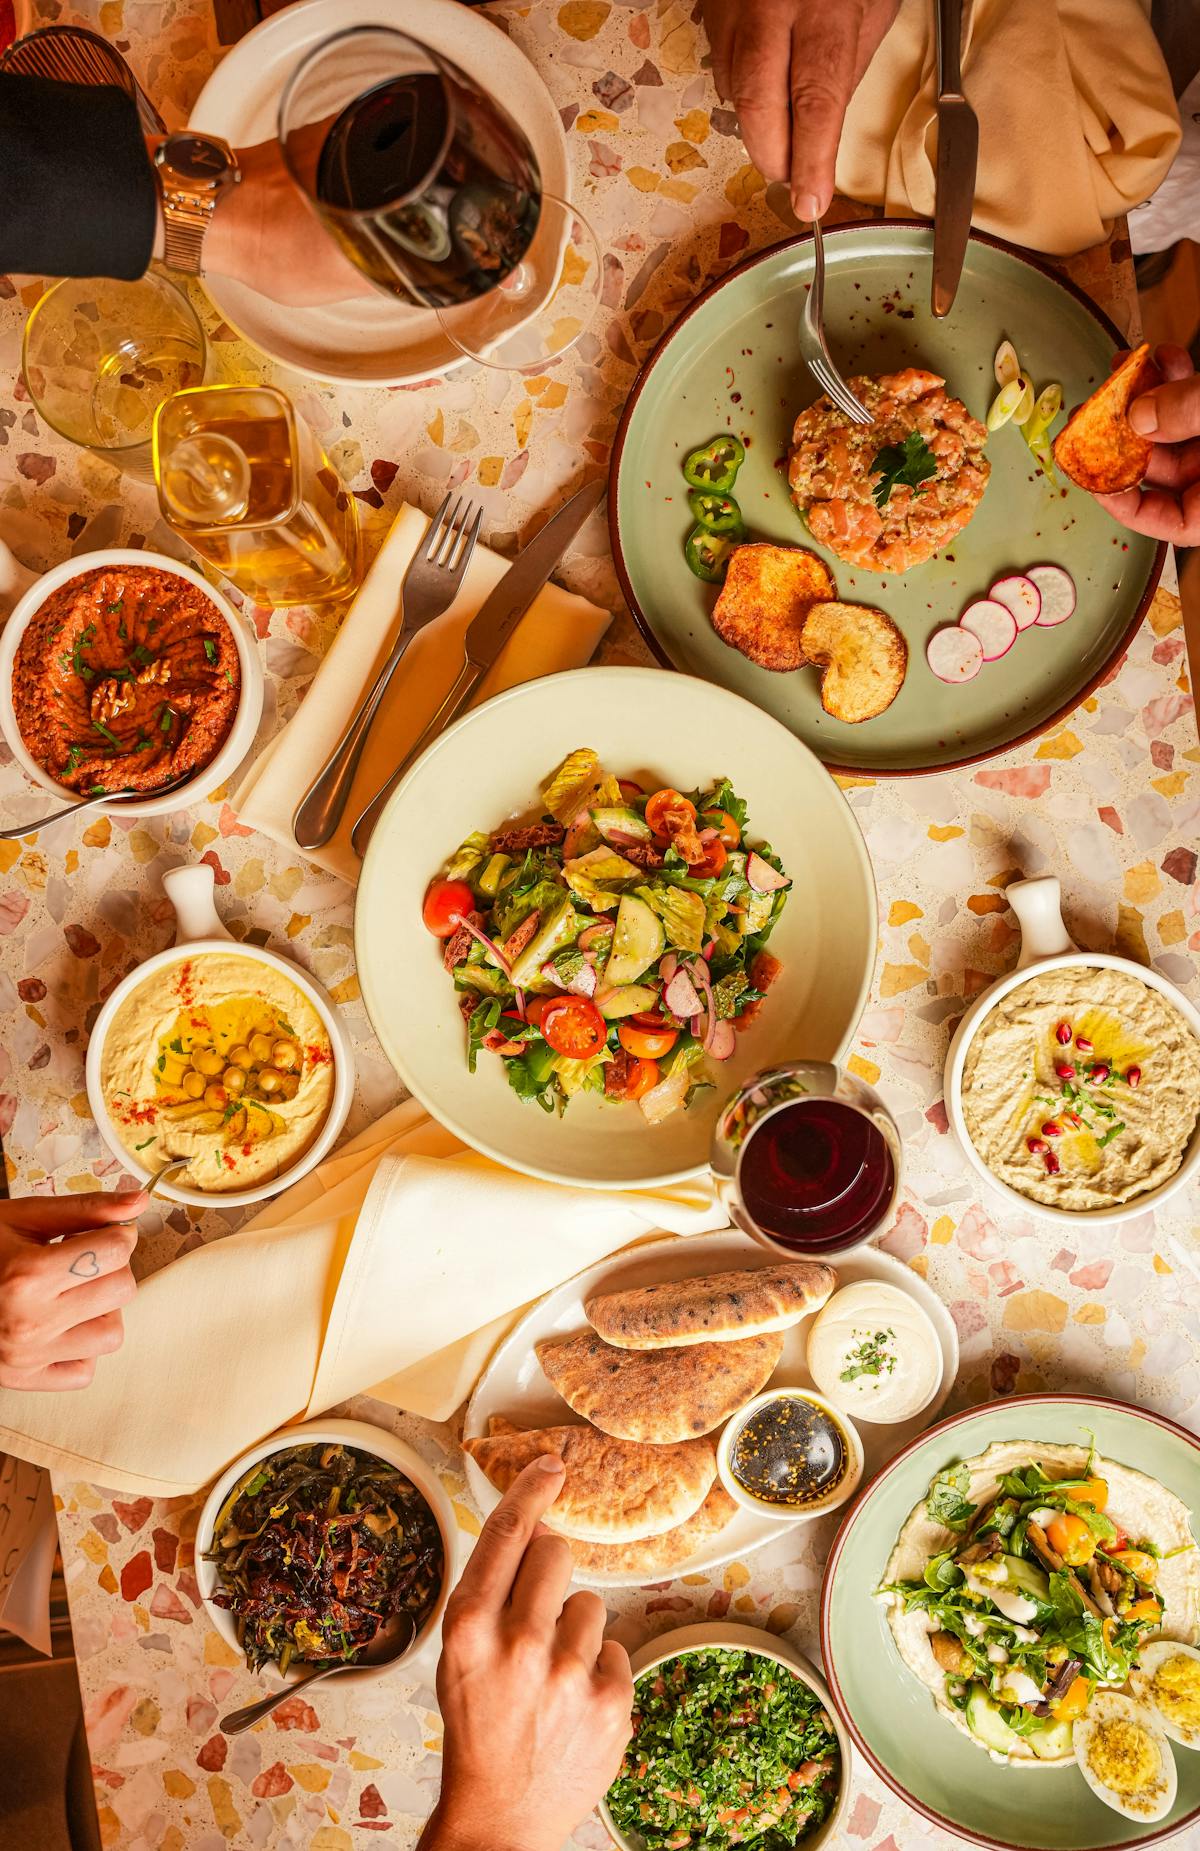 a table at BIS with a variety of Kosher Middle Eastern dishes including fattoush salad and mezze such as hummus, baba ghanoush, and muhammara